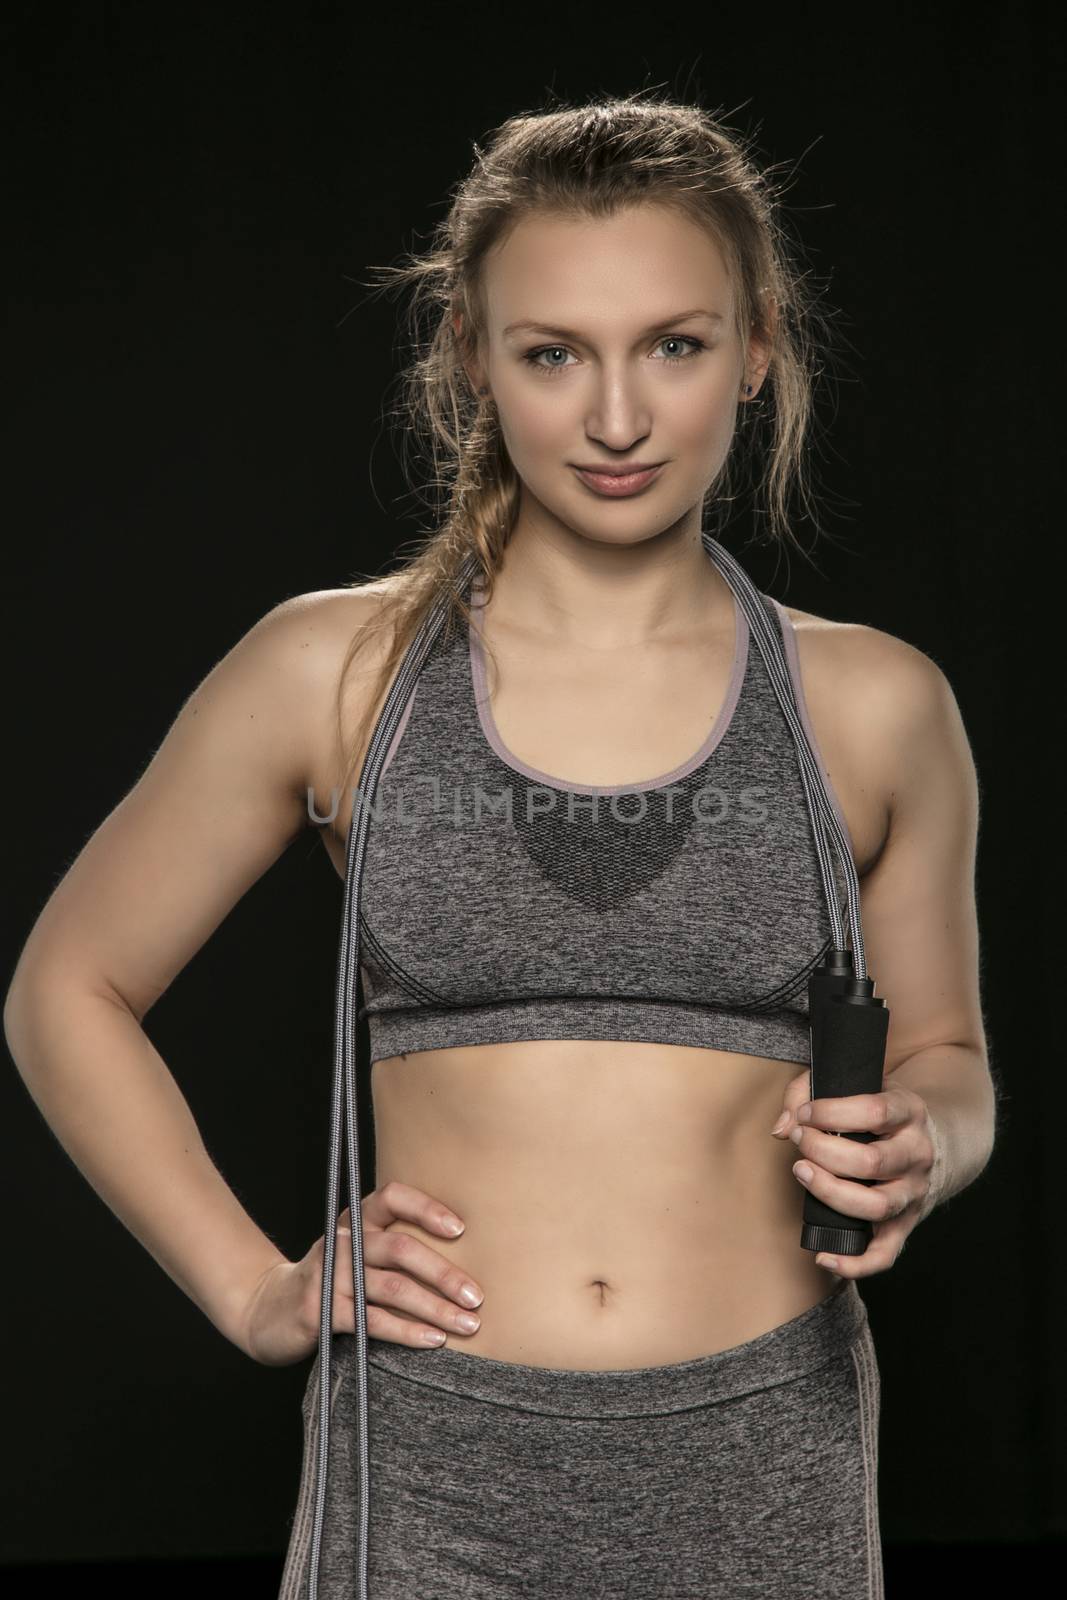 beautiful athletic girl is practicing with a skipping rope, isolated on the black background